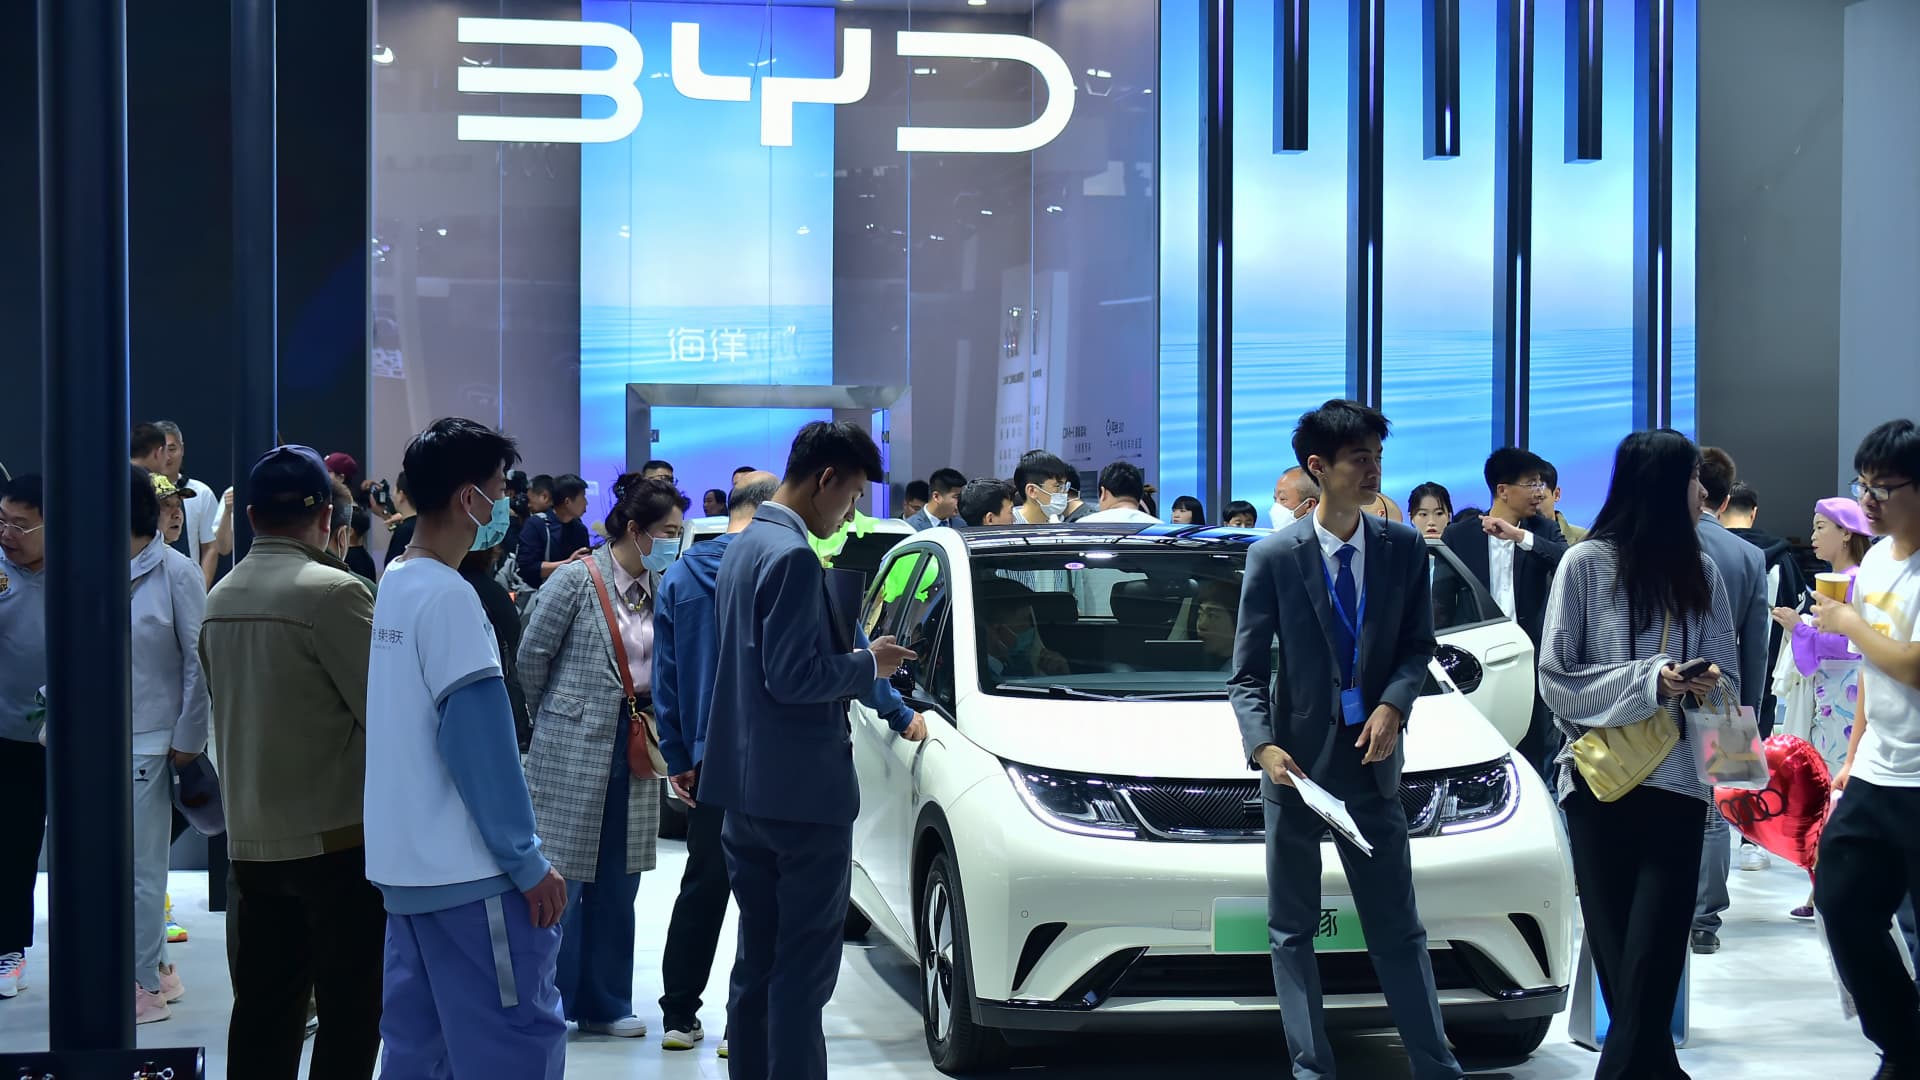 People look at a BYD Dolphin electric subcompact during the 2023 Shenyang International Auto Show on May 3, 2023 in Shenyang, Liaoning Province of China.